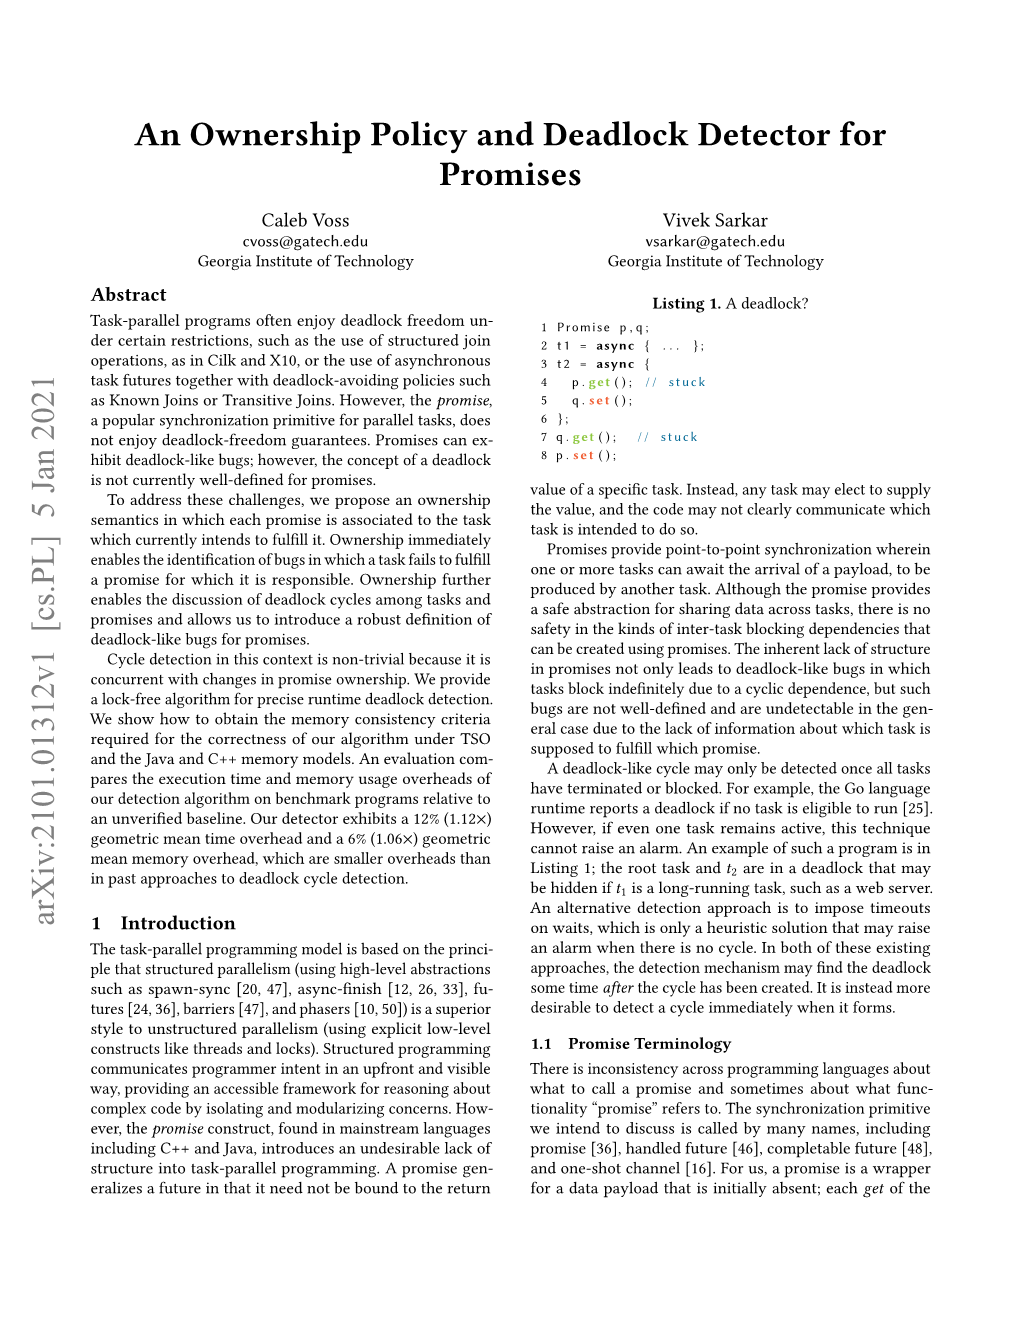 An Ownership Policy and Deadlock Detector for Promises